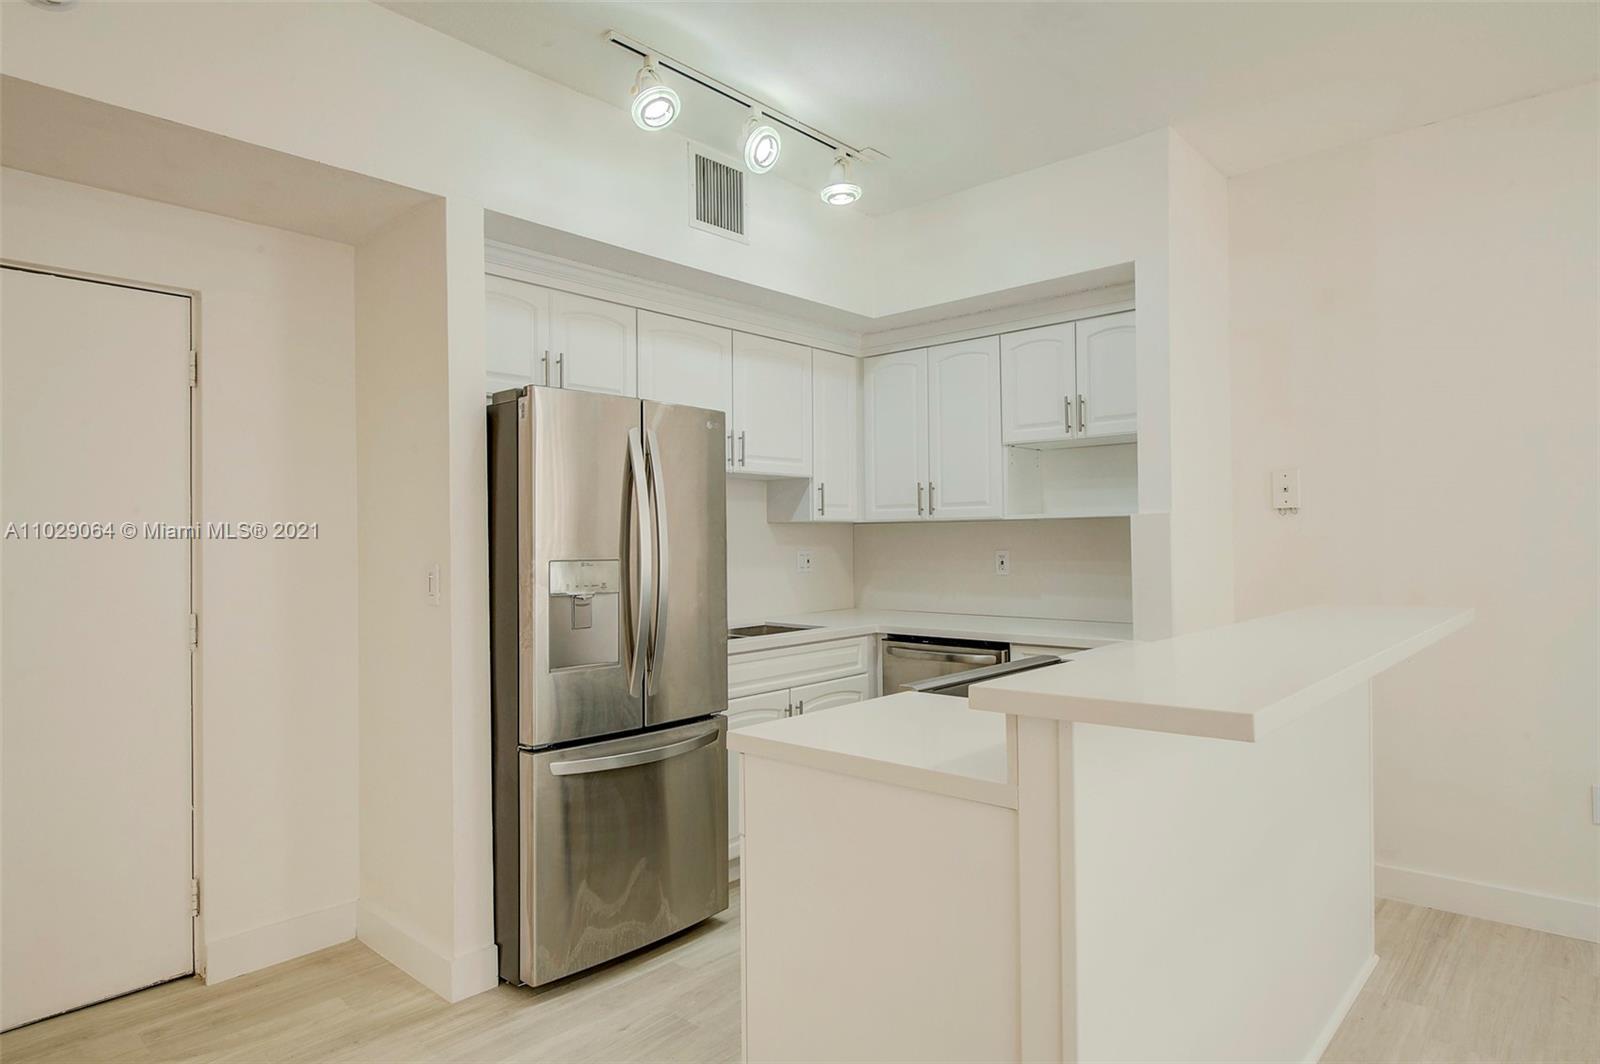 Great deal! Beautifully renovated 1/1 with parking, close to the beach, in a well-managed, historic,